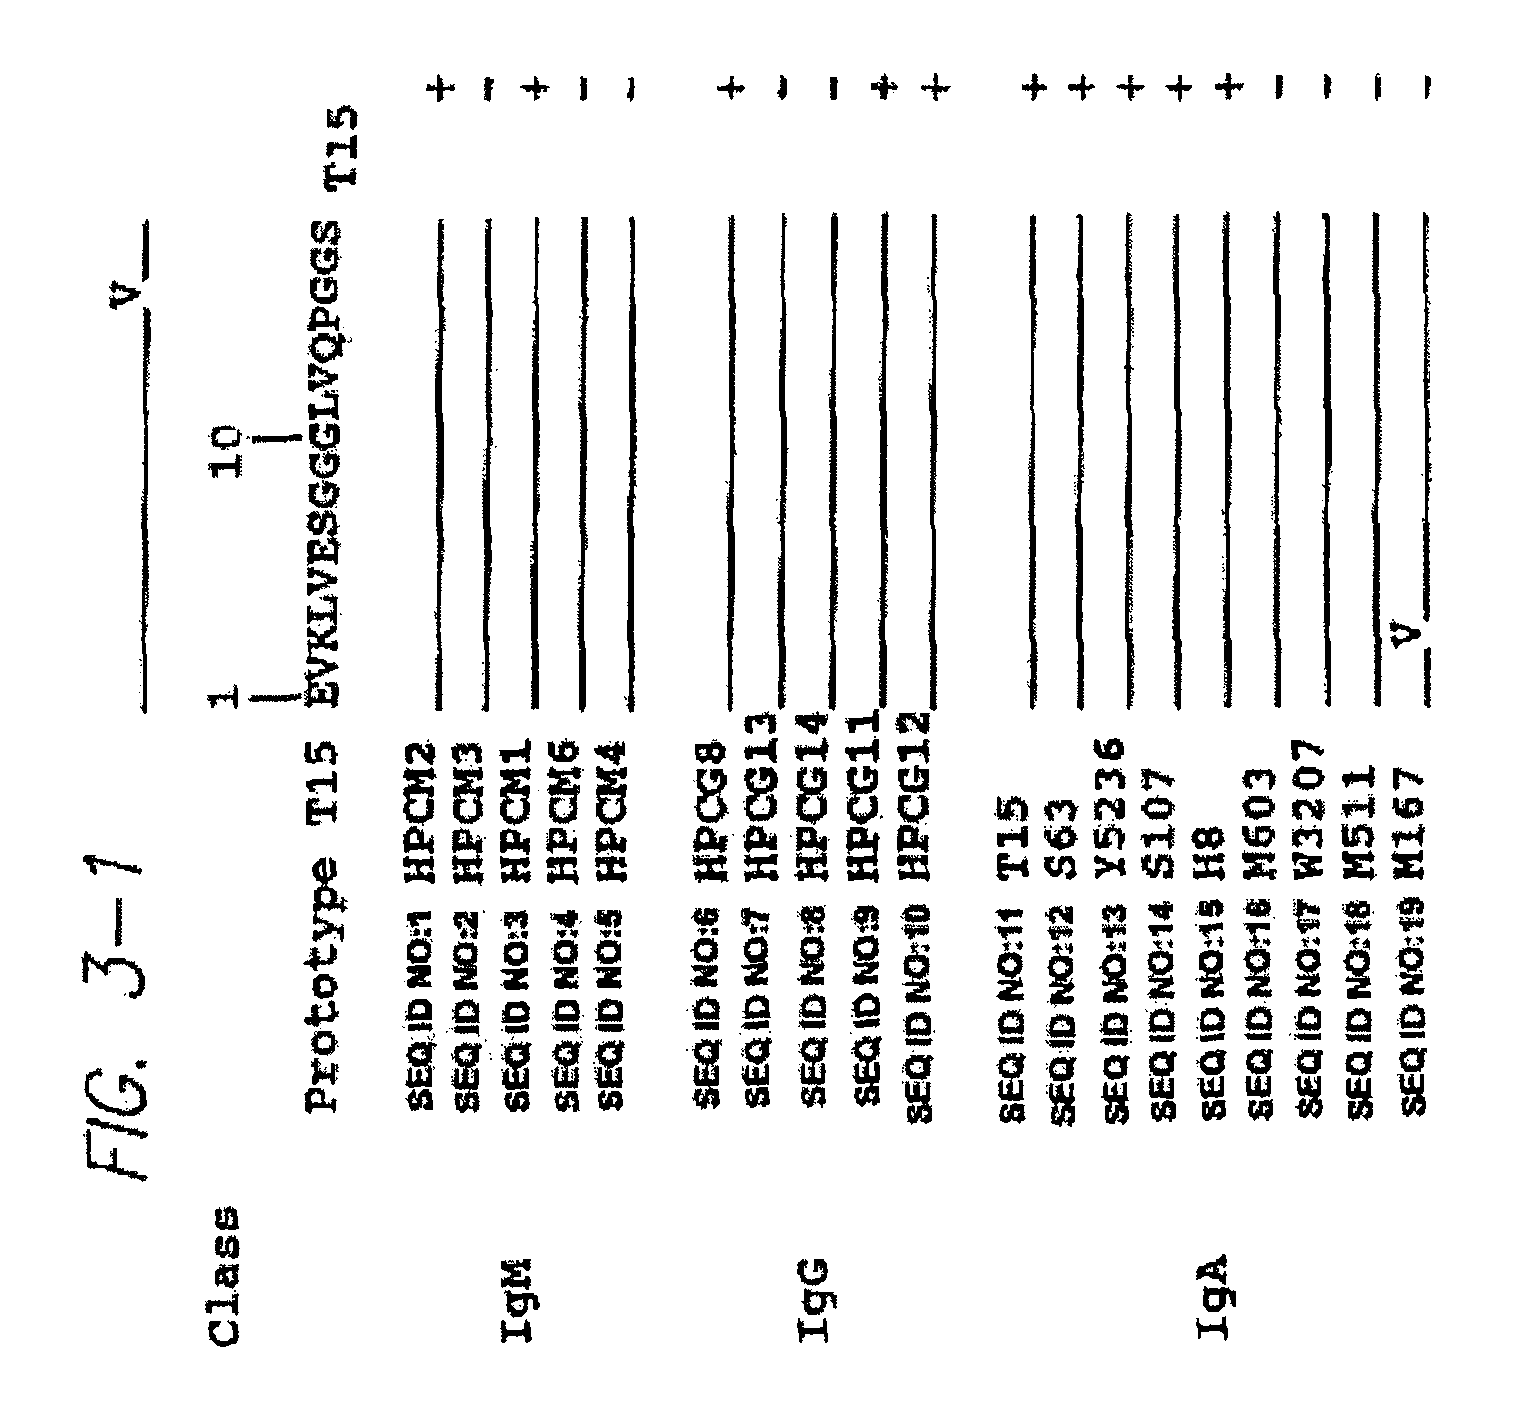 Method for producing polymers having a preselected activity